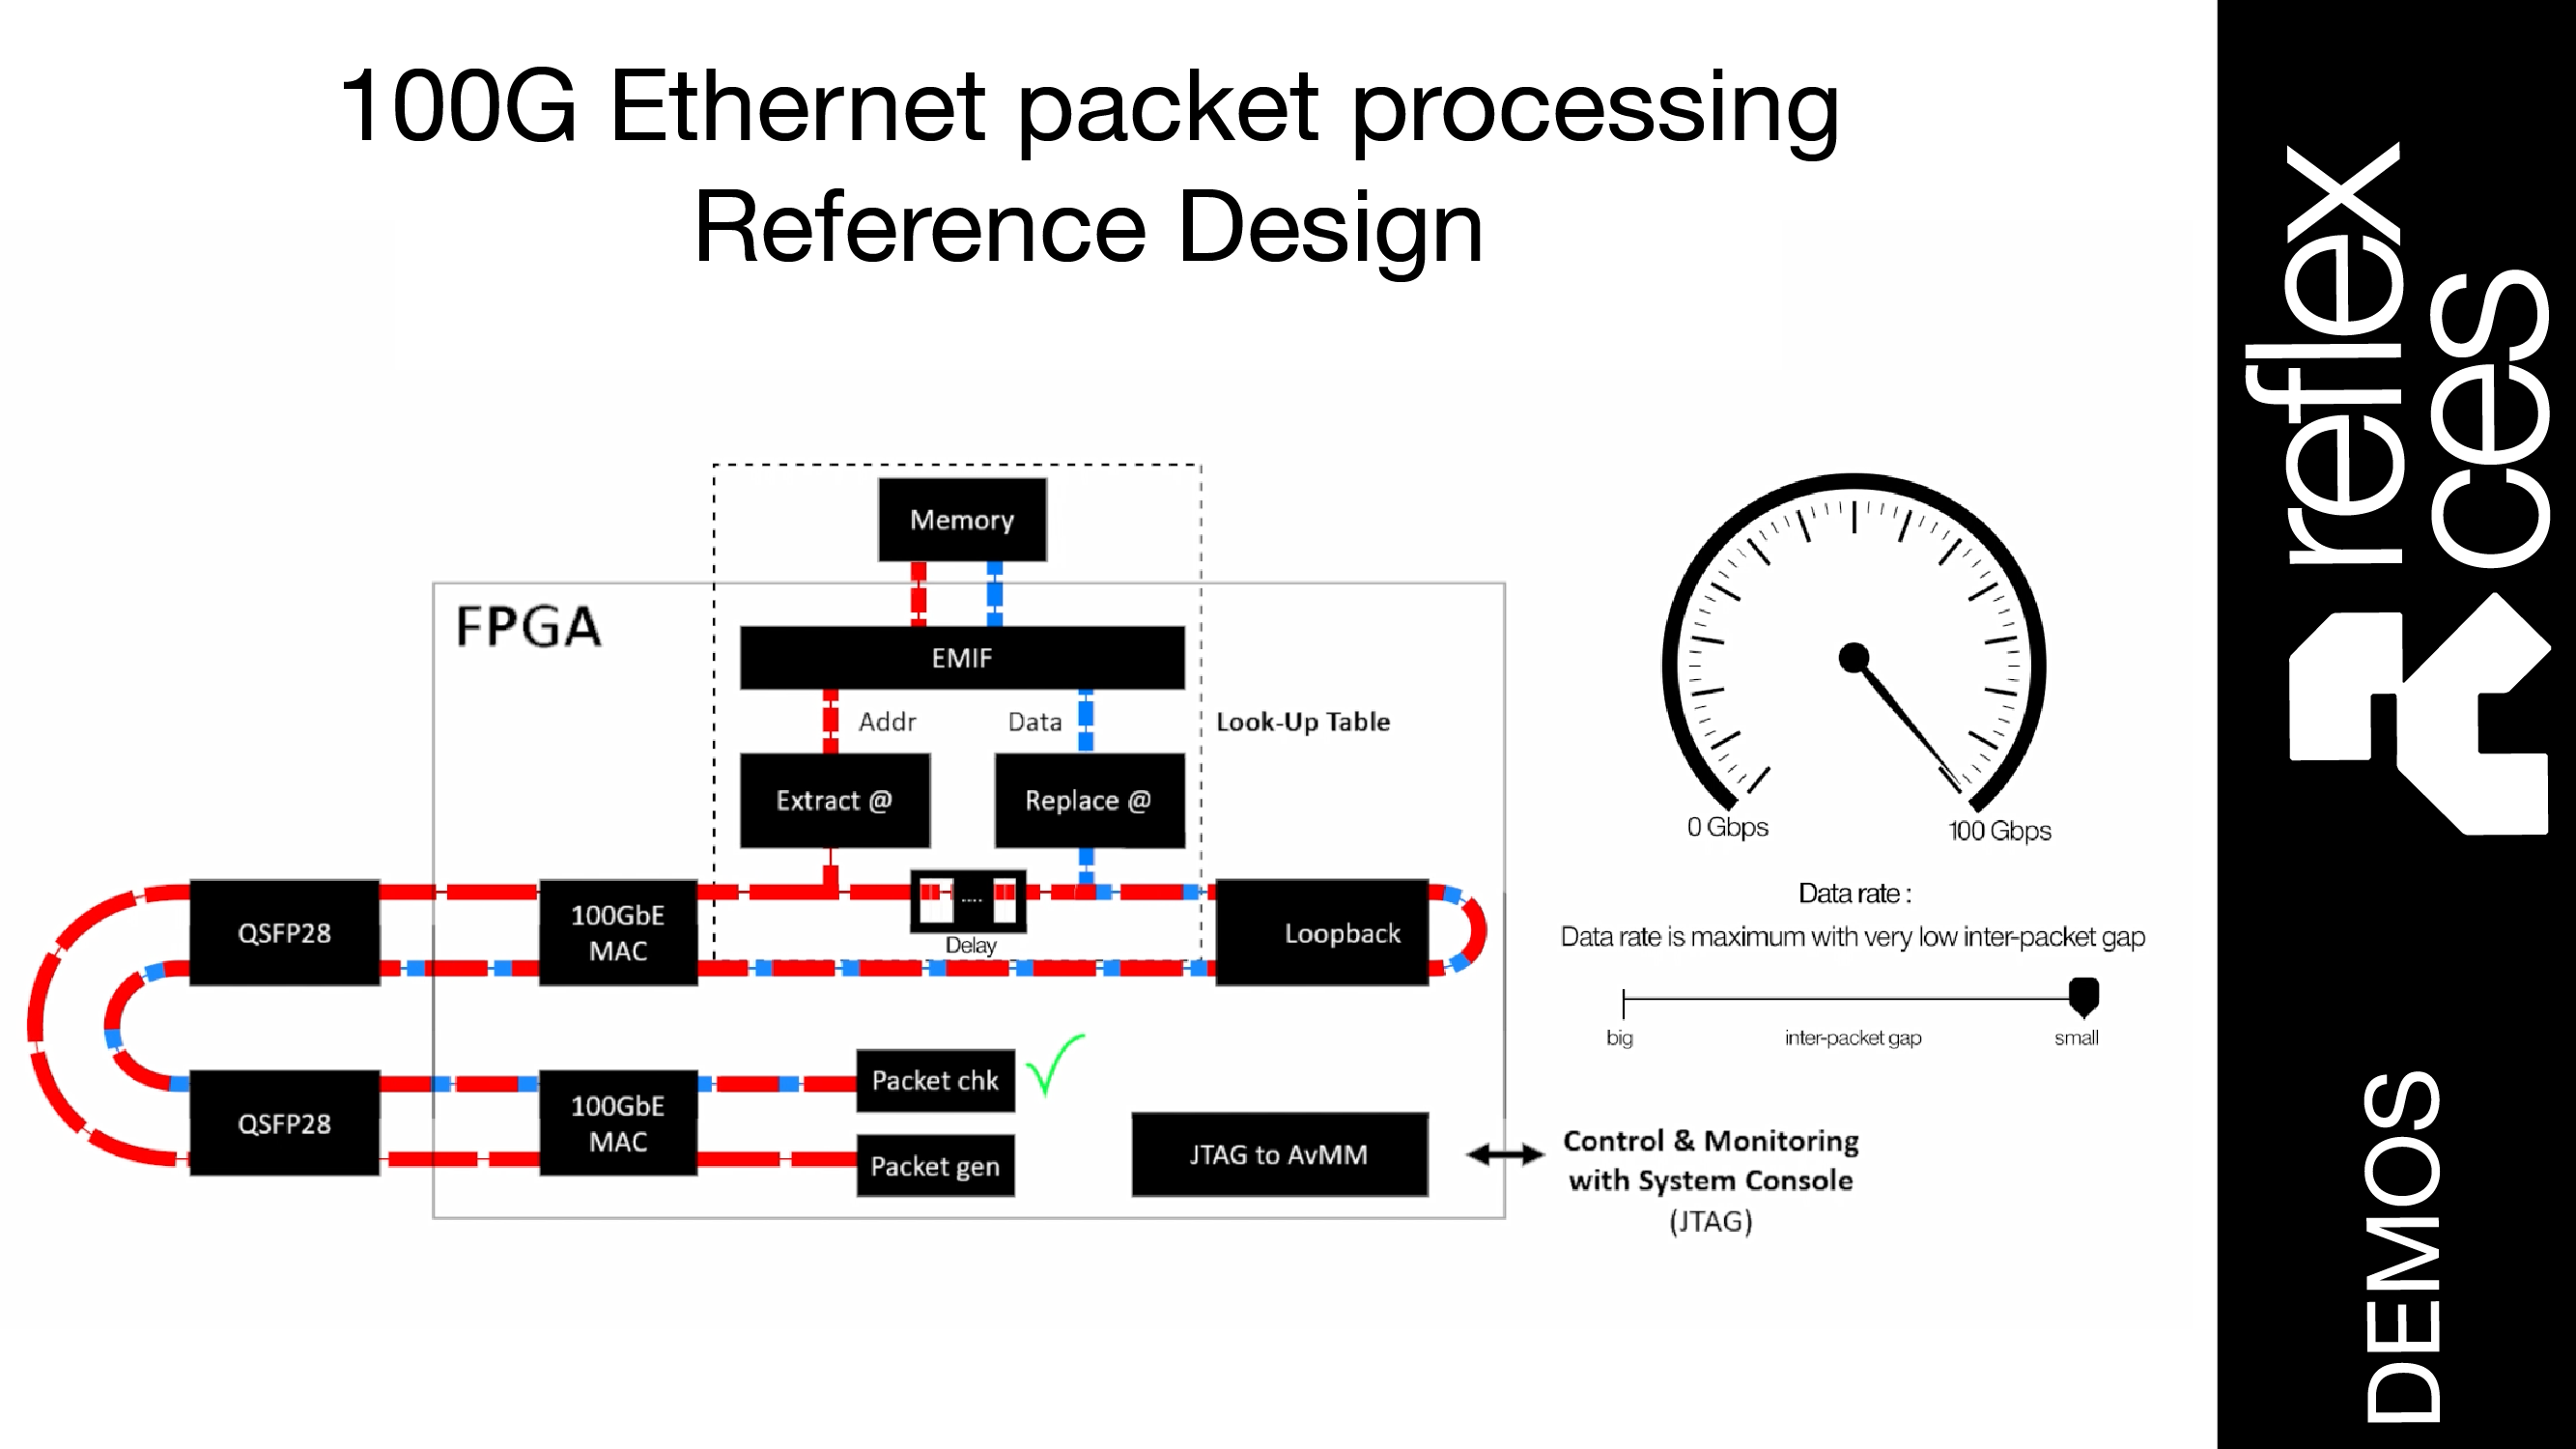 [ VIDEO ] 100G Ethernet packet processing Reference Design